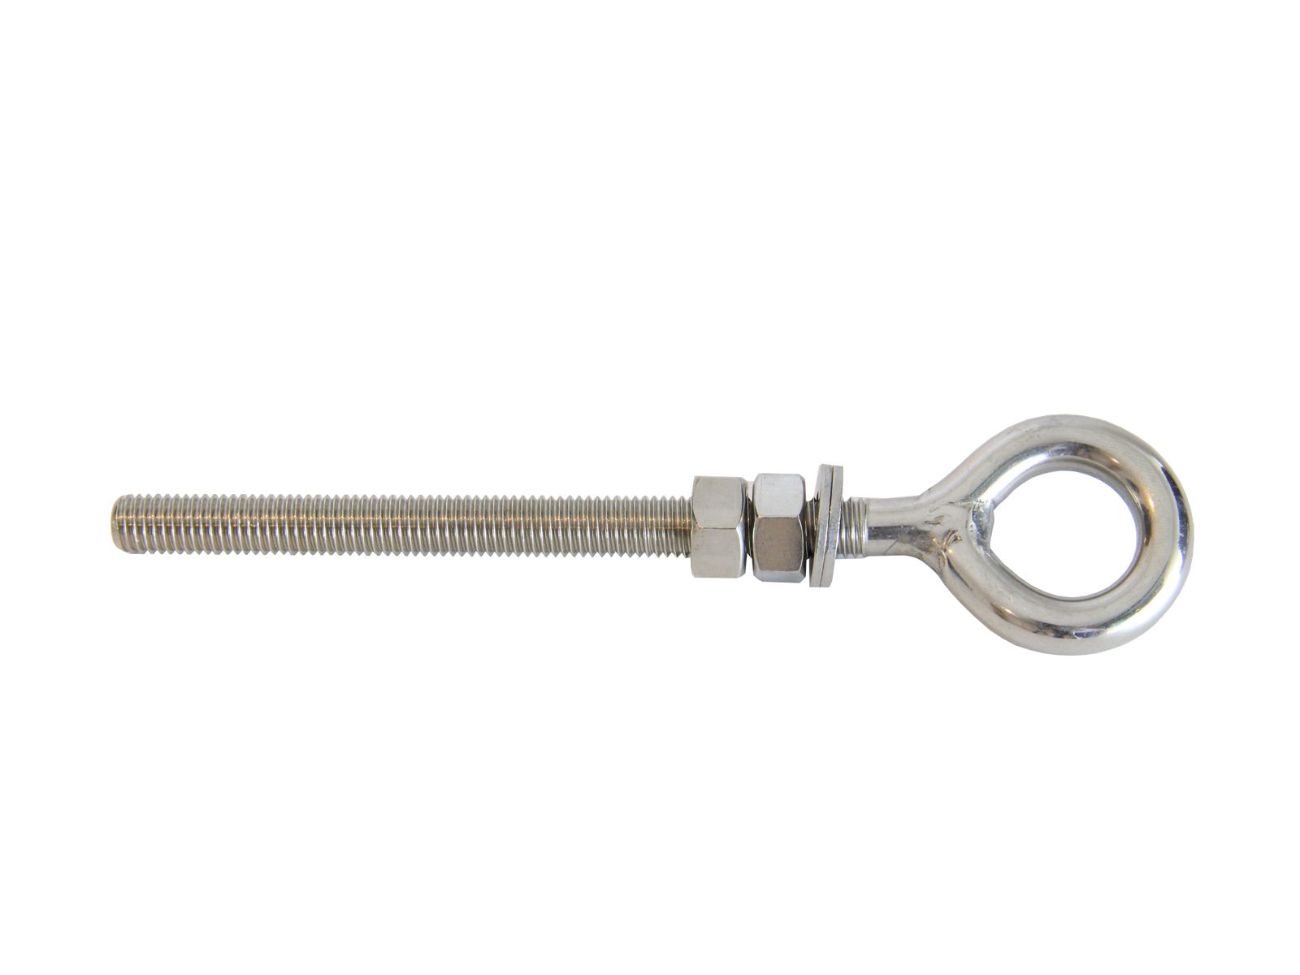 140mm stainless steel eyebolt for shade sails